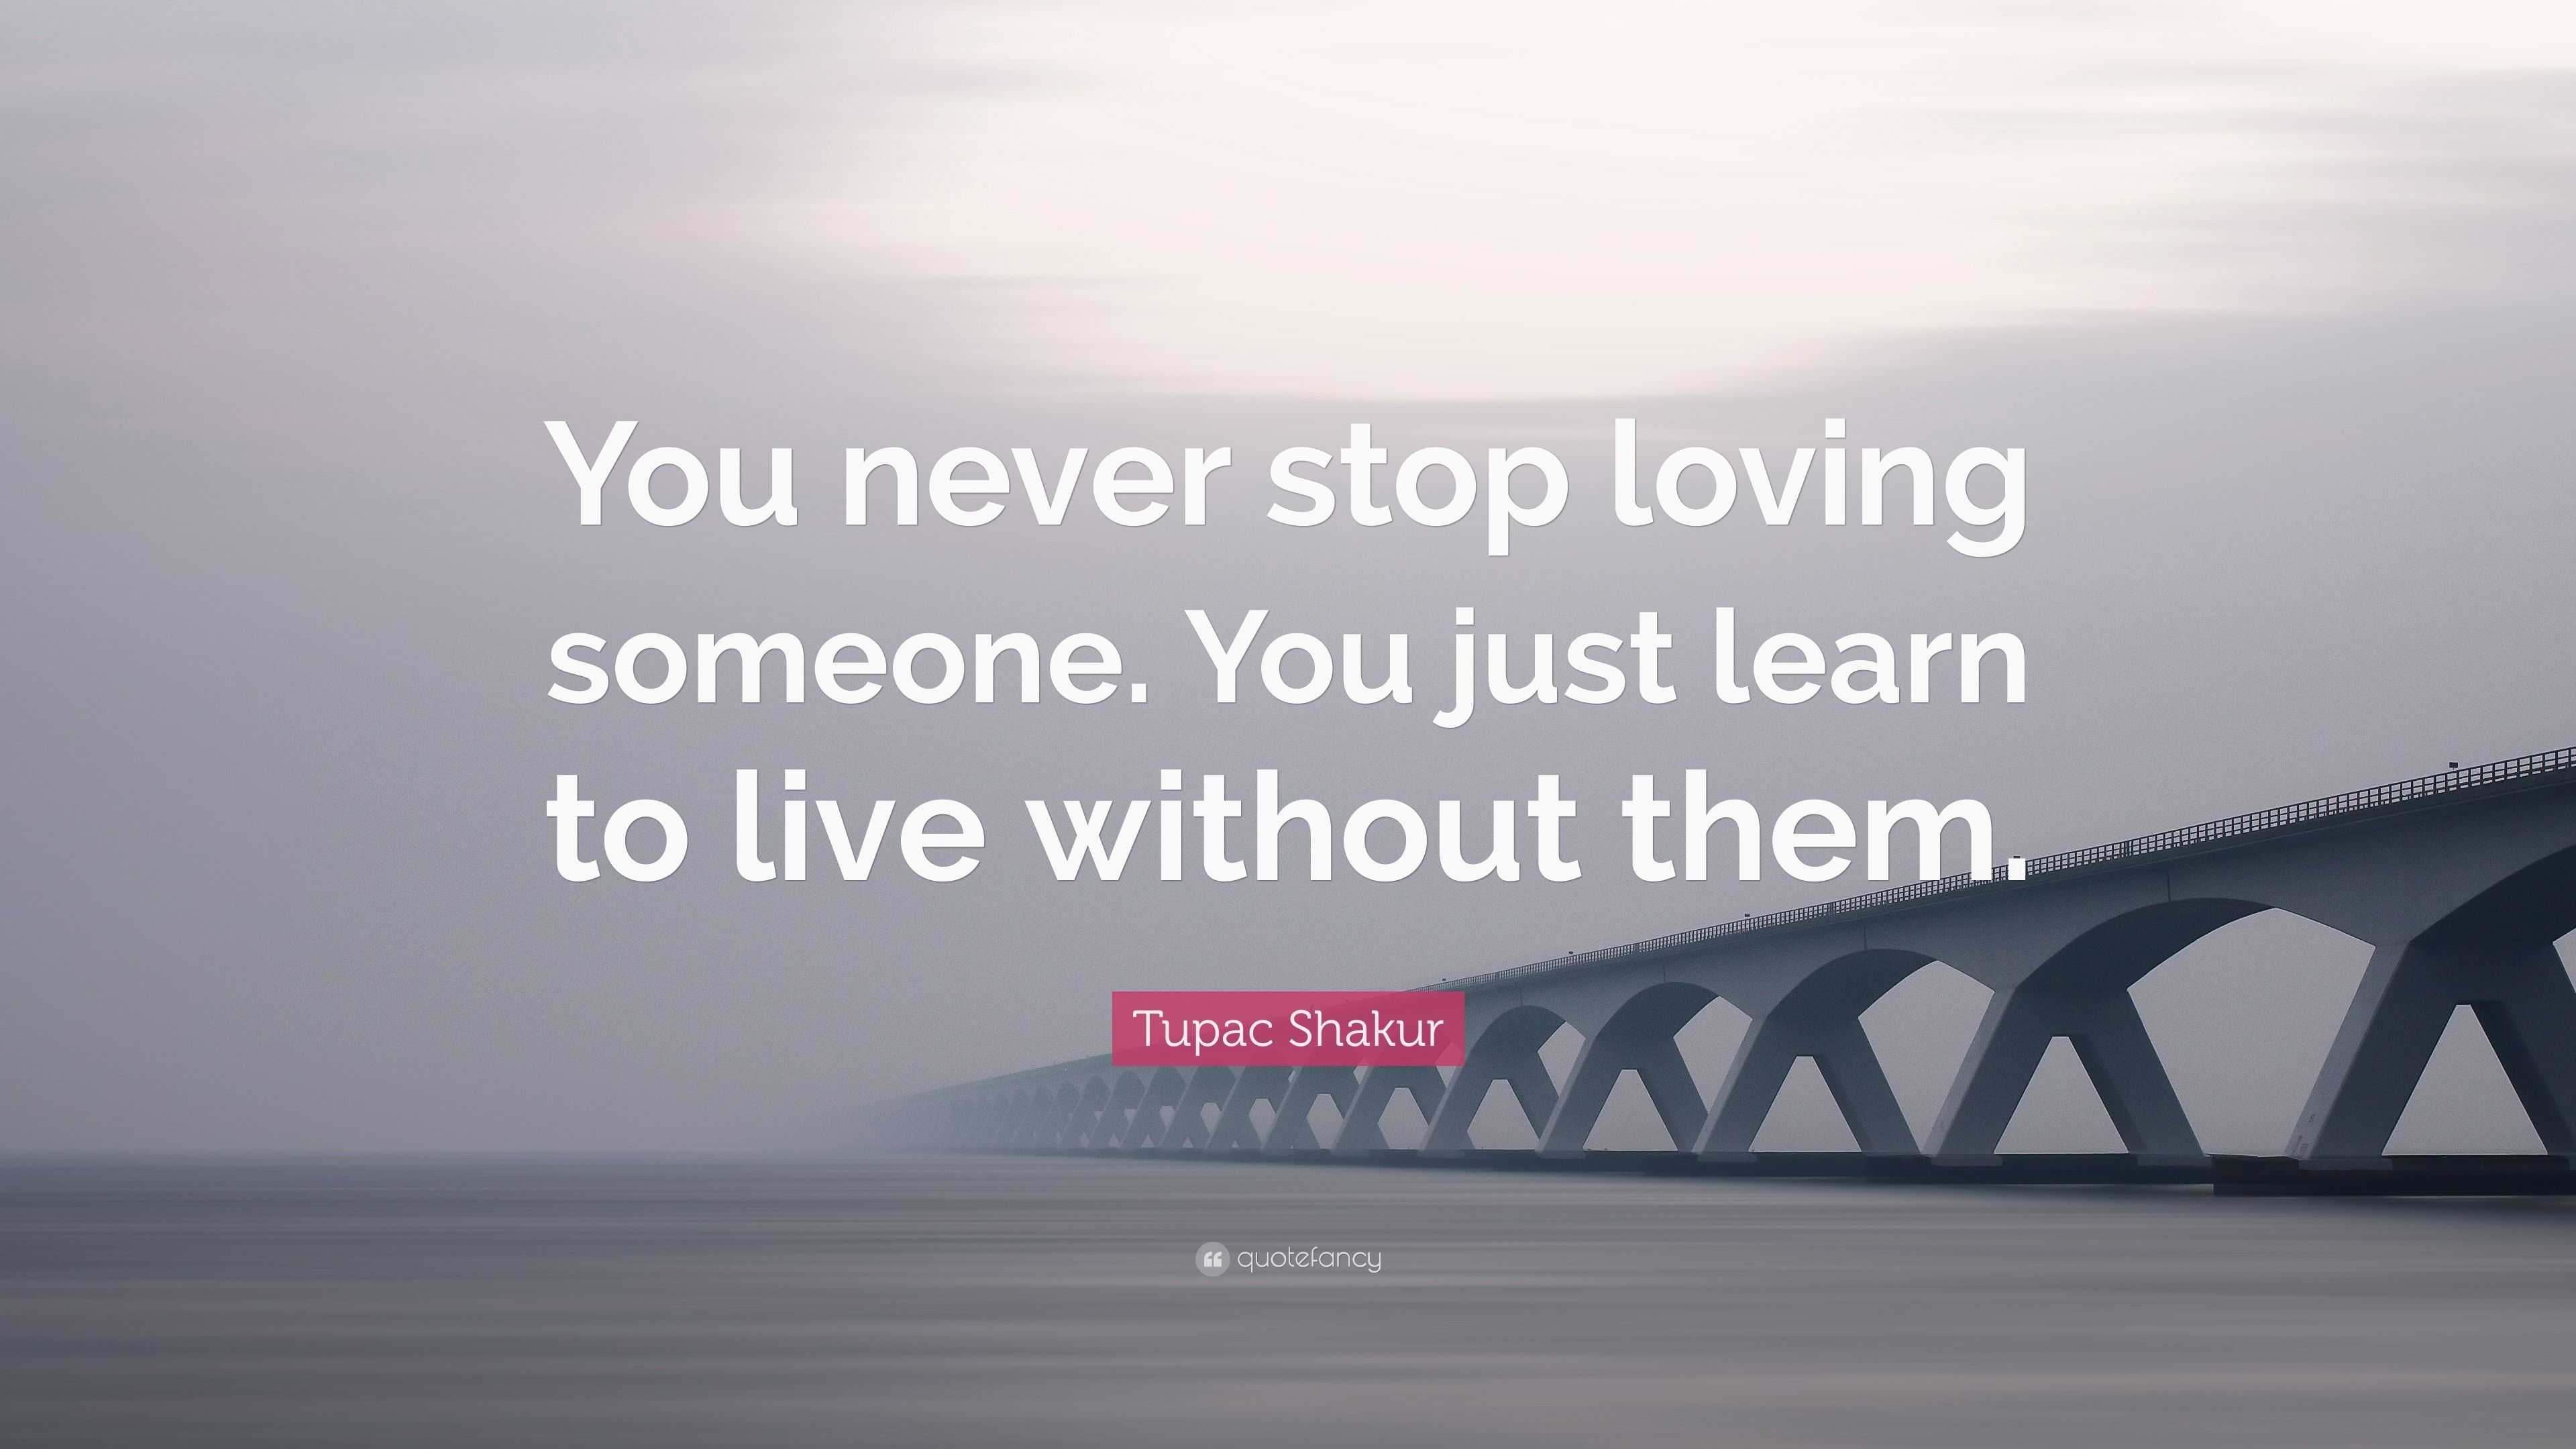 Tupac Shakur Quote “You never stop loving someone You just learn to live